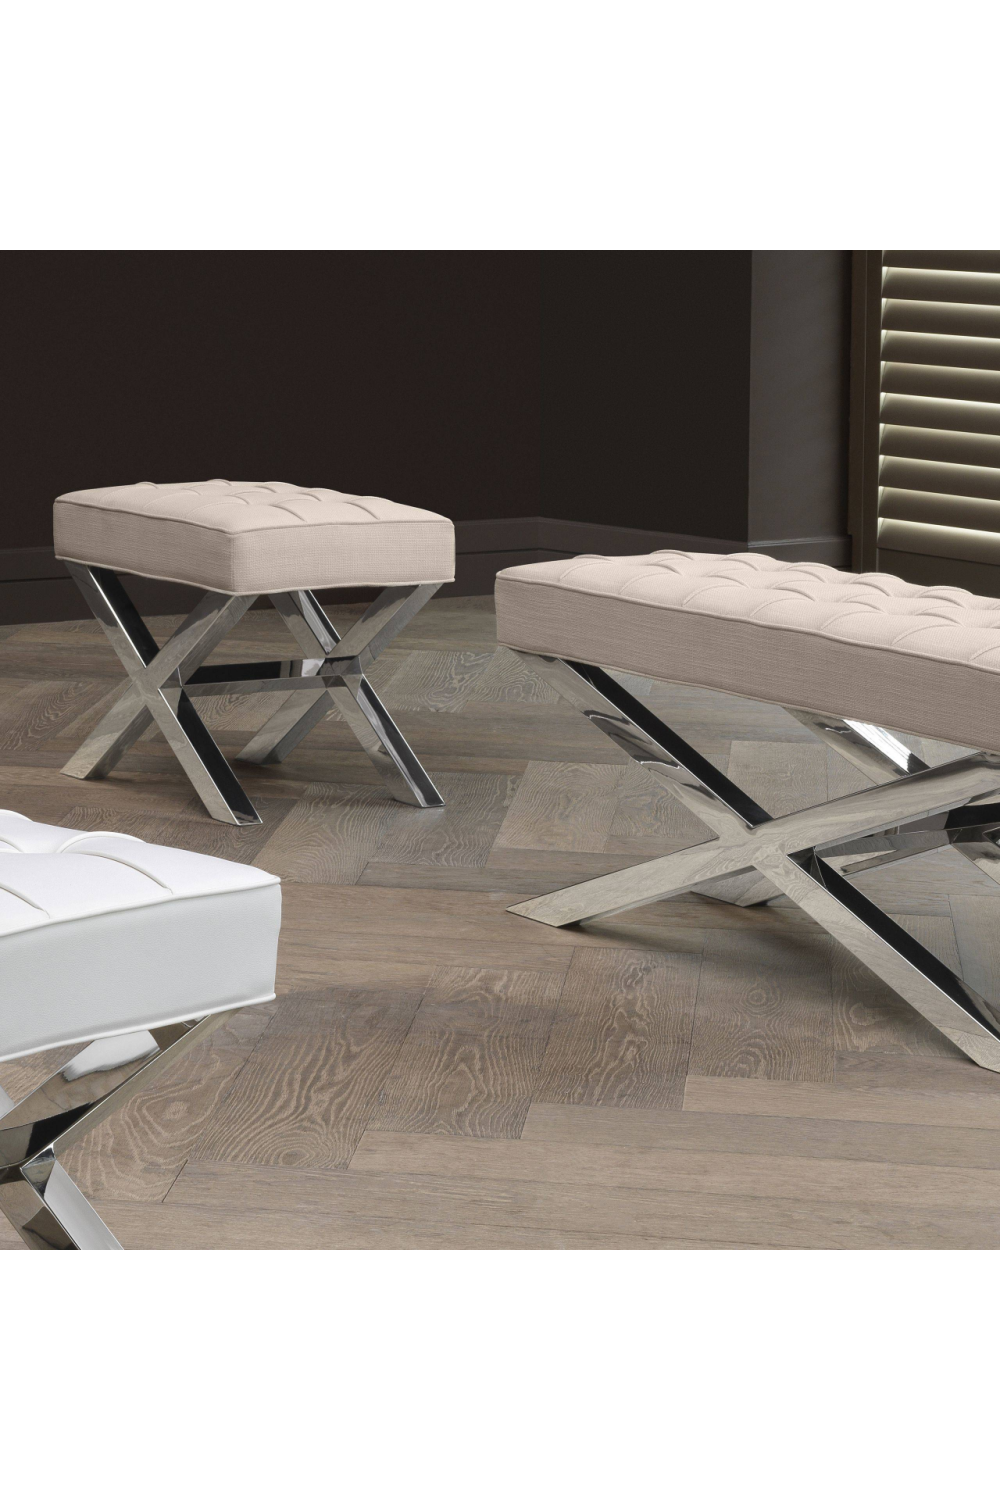 White Buttoned Crossover Base Stool | Eichholtz Beekman Place | Oroa.com